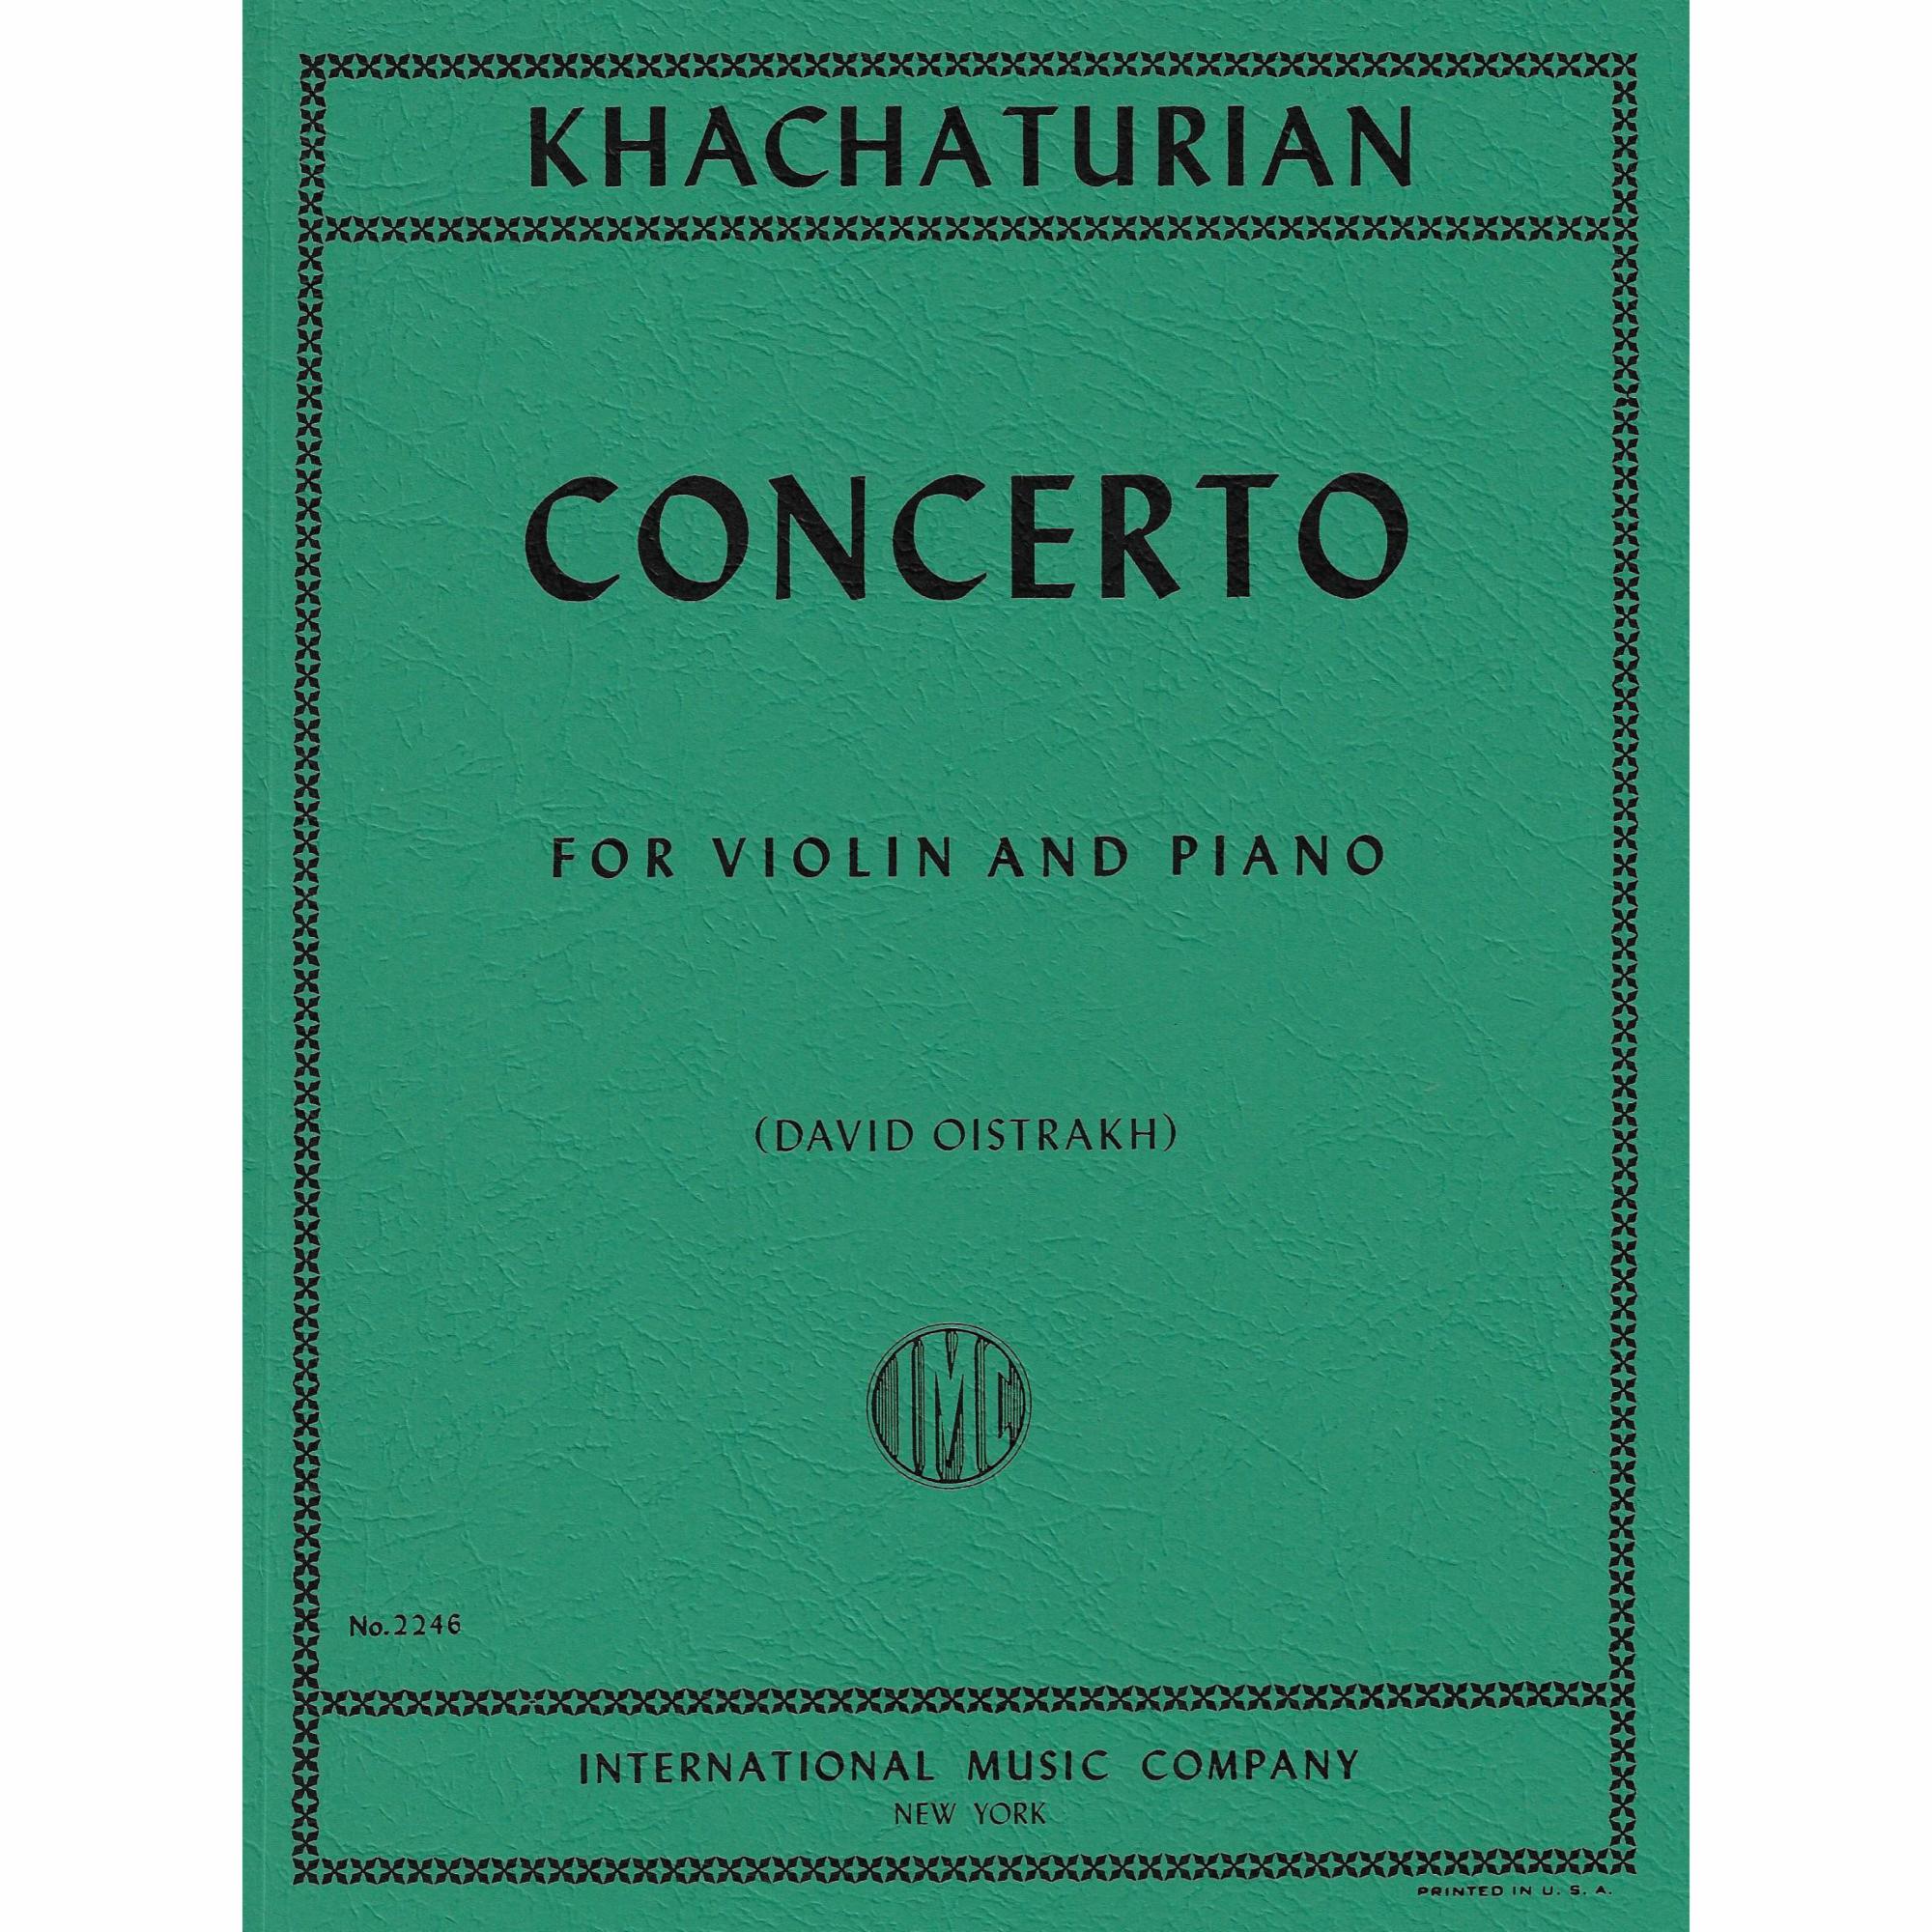 Khachaturian -- Concerto for Violin and Piano